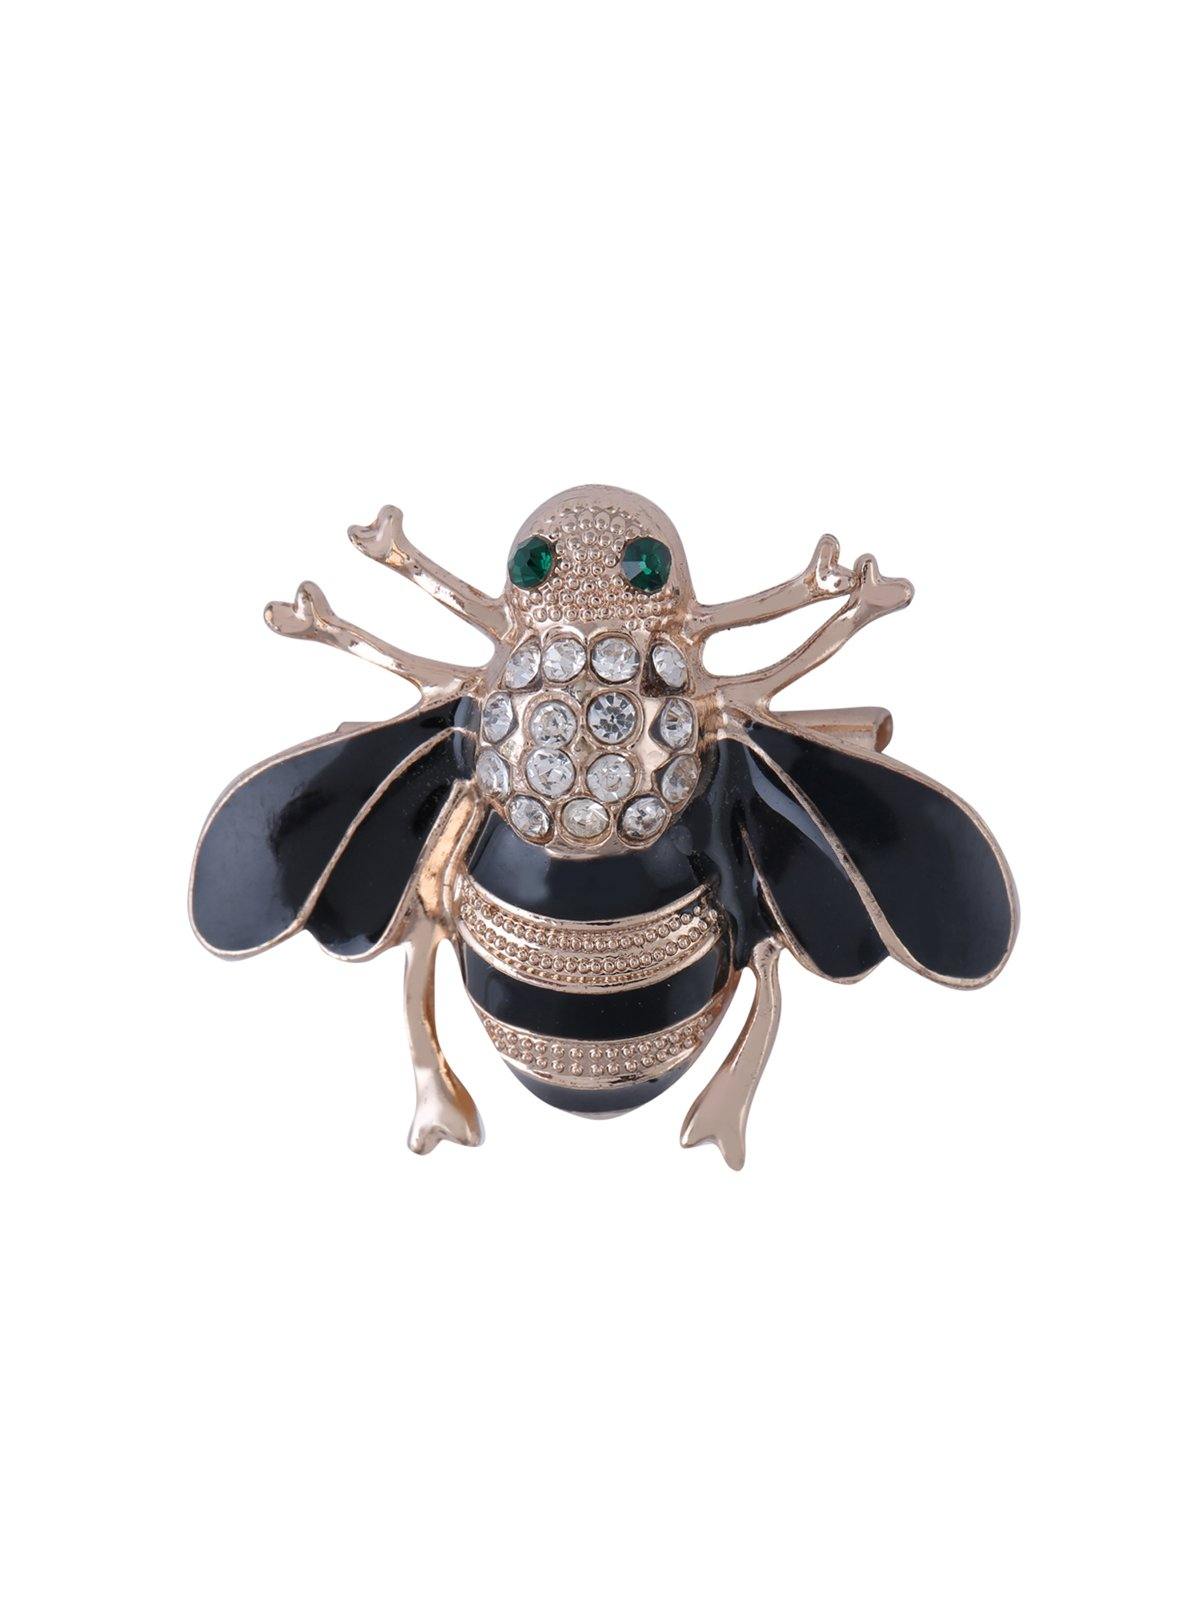 Stunning Black & Gold Bee Insect Brooch Pin